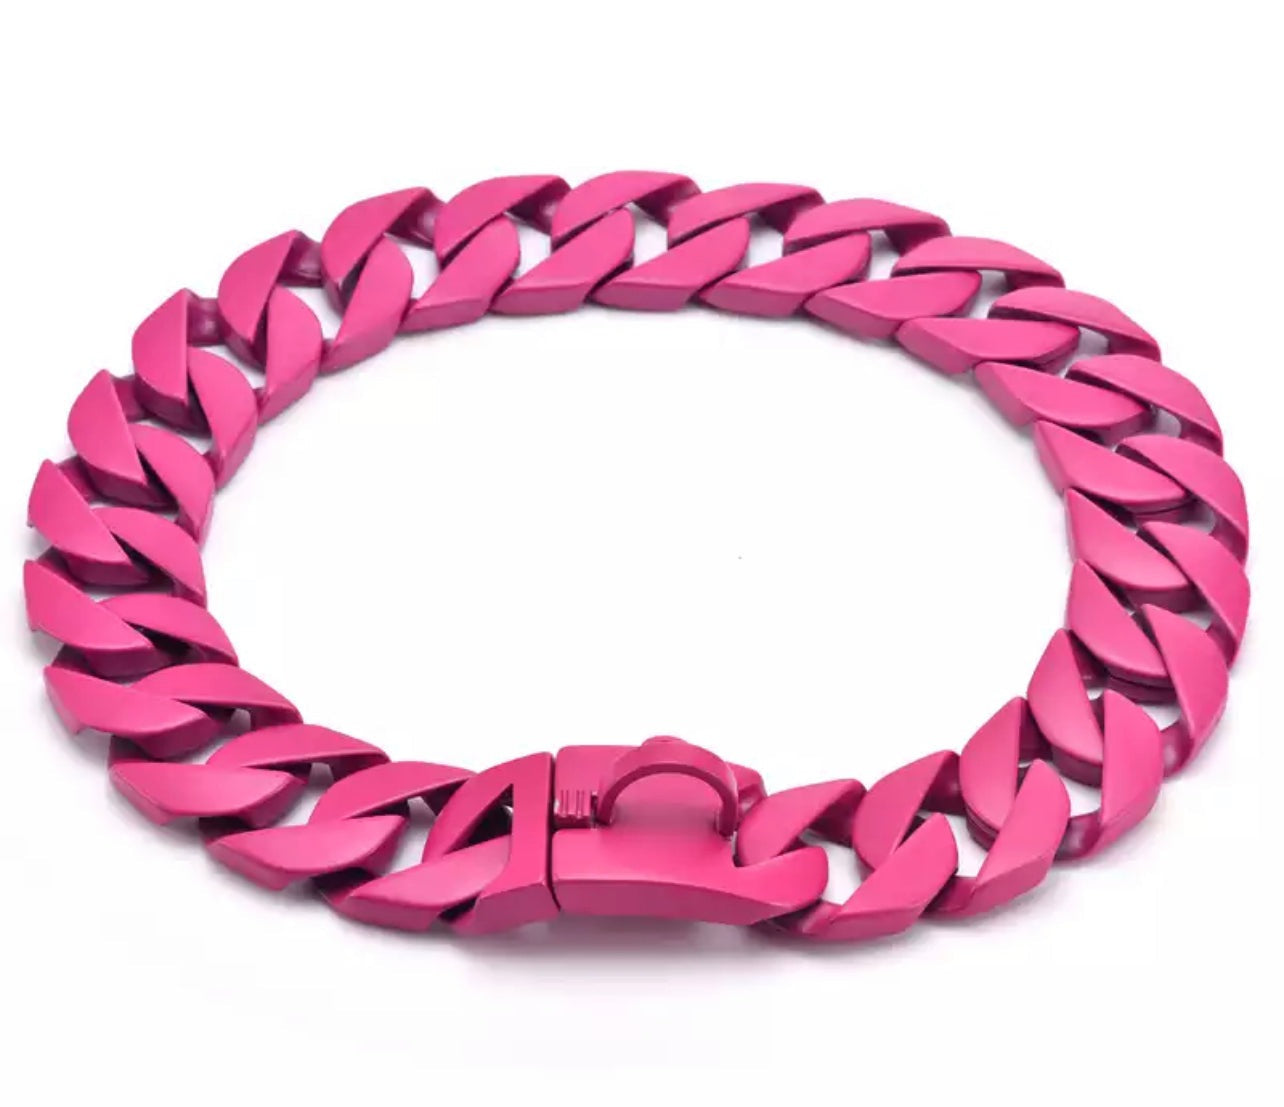 Cuban Chain Pet Collar & Leash Stainless Steel 32mm - Hot Pink